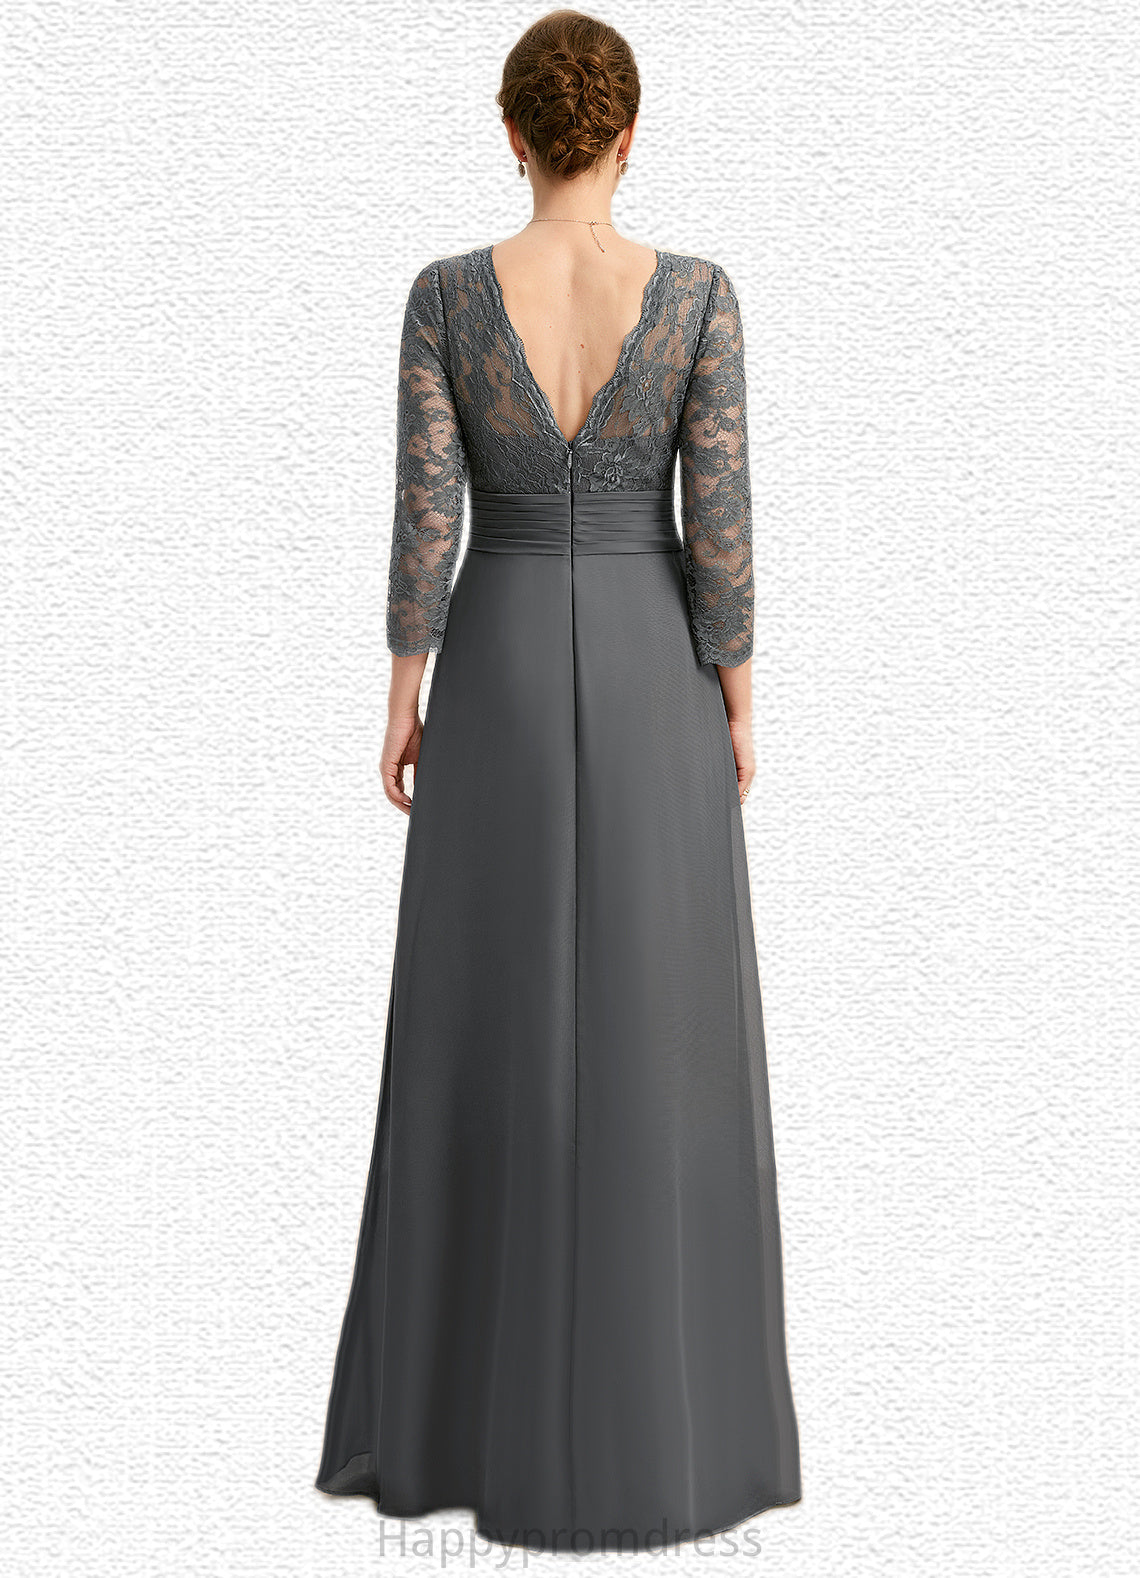 Sam A-line V-Neck Floor-Length Chiffon Lace Mother of the Bride Dress With Pleated XXSP0021850